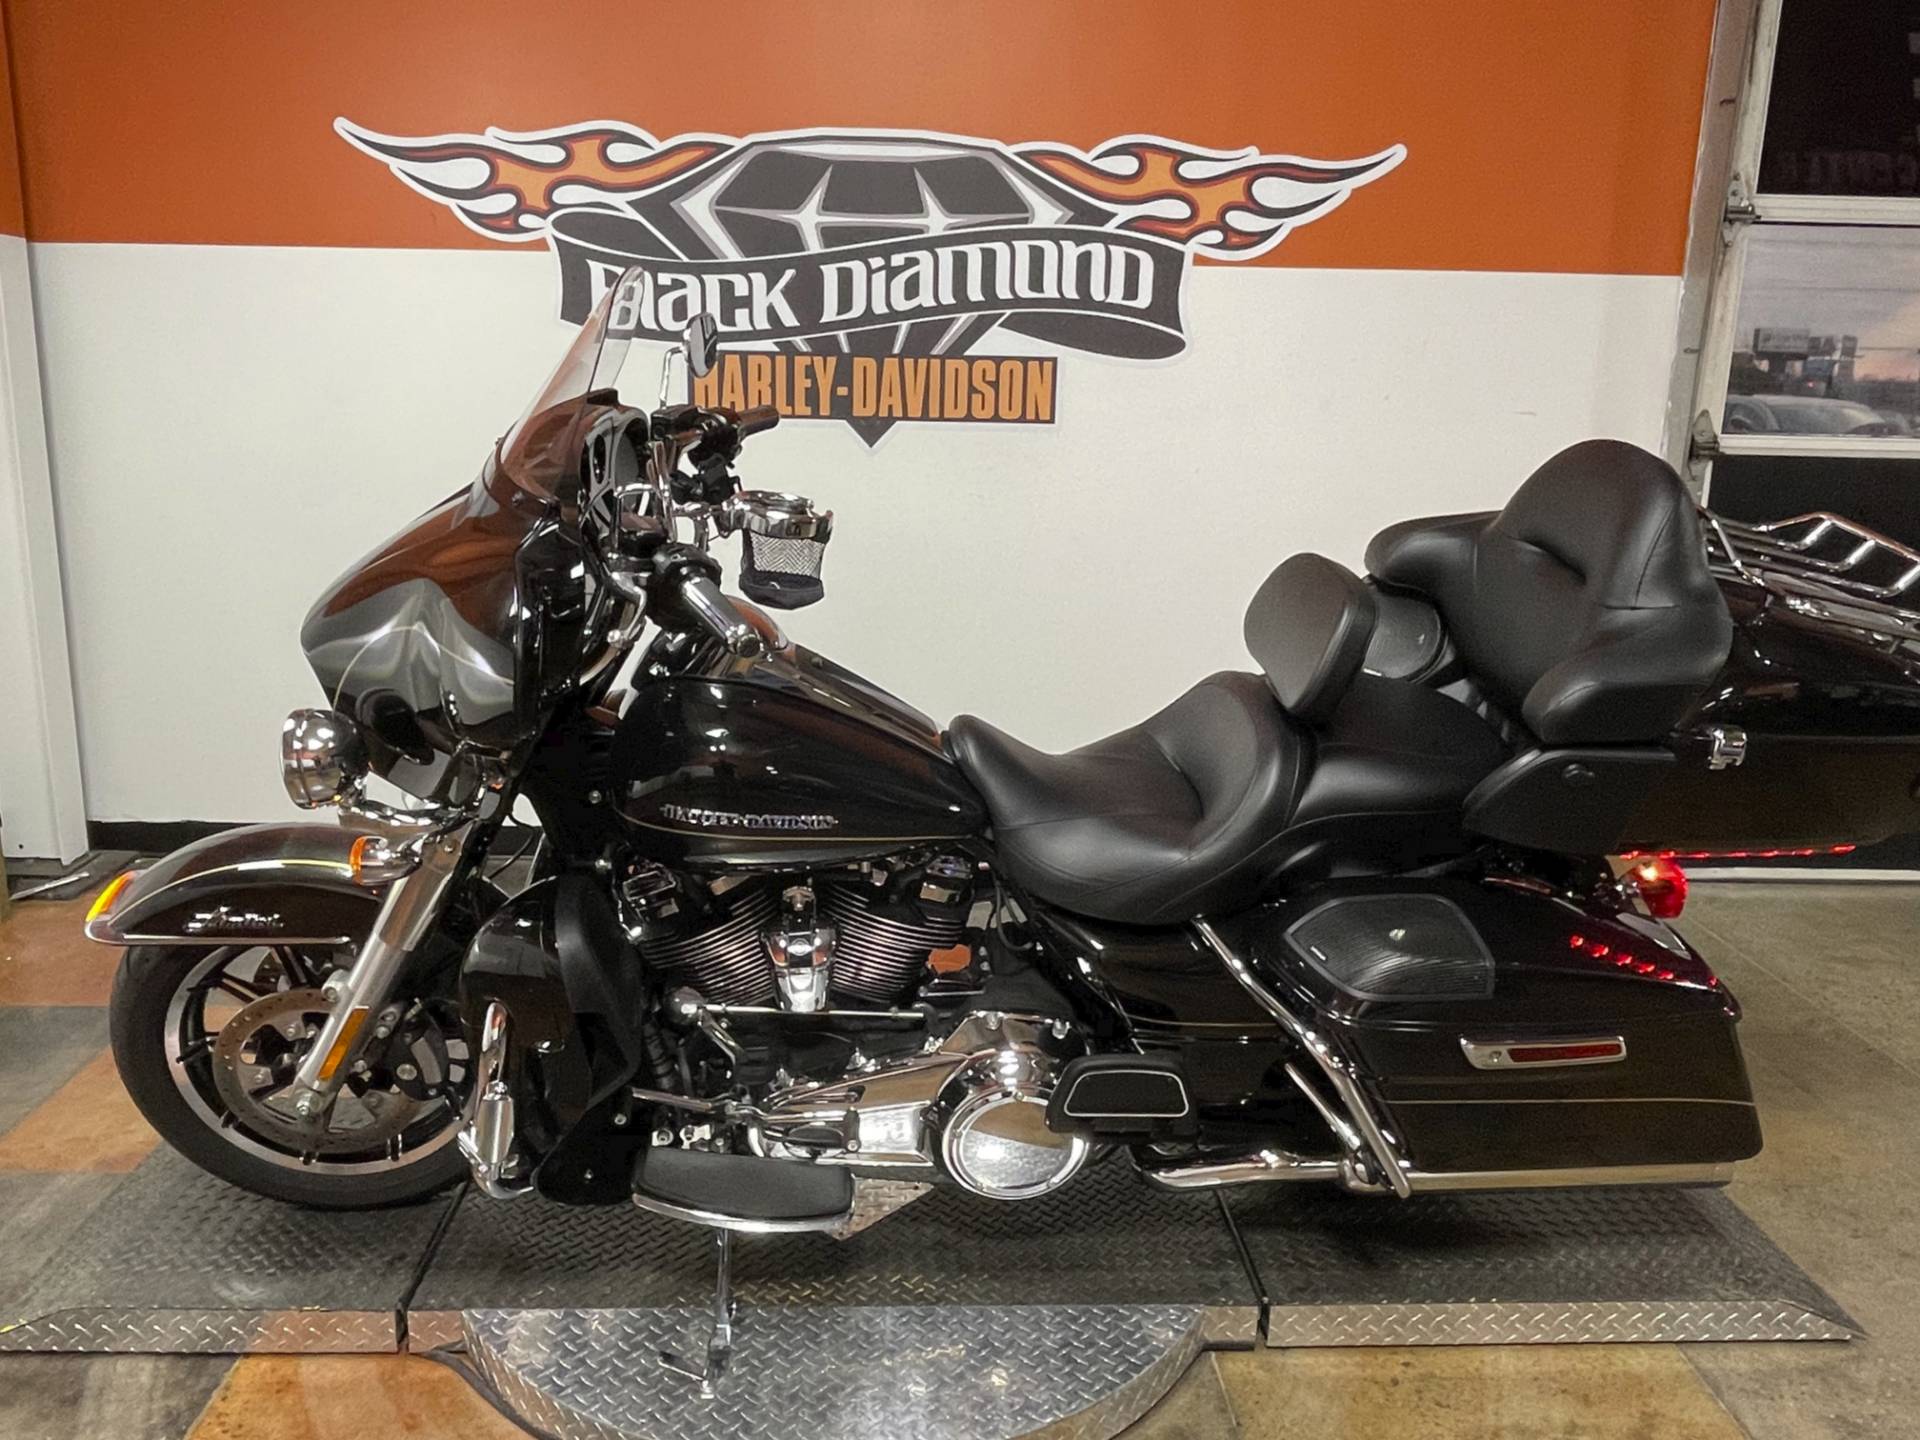 Used 2017 Harley Davidson Ultra Limited Vivid Black Motorcycles In Marion Il U669452